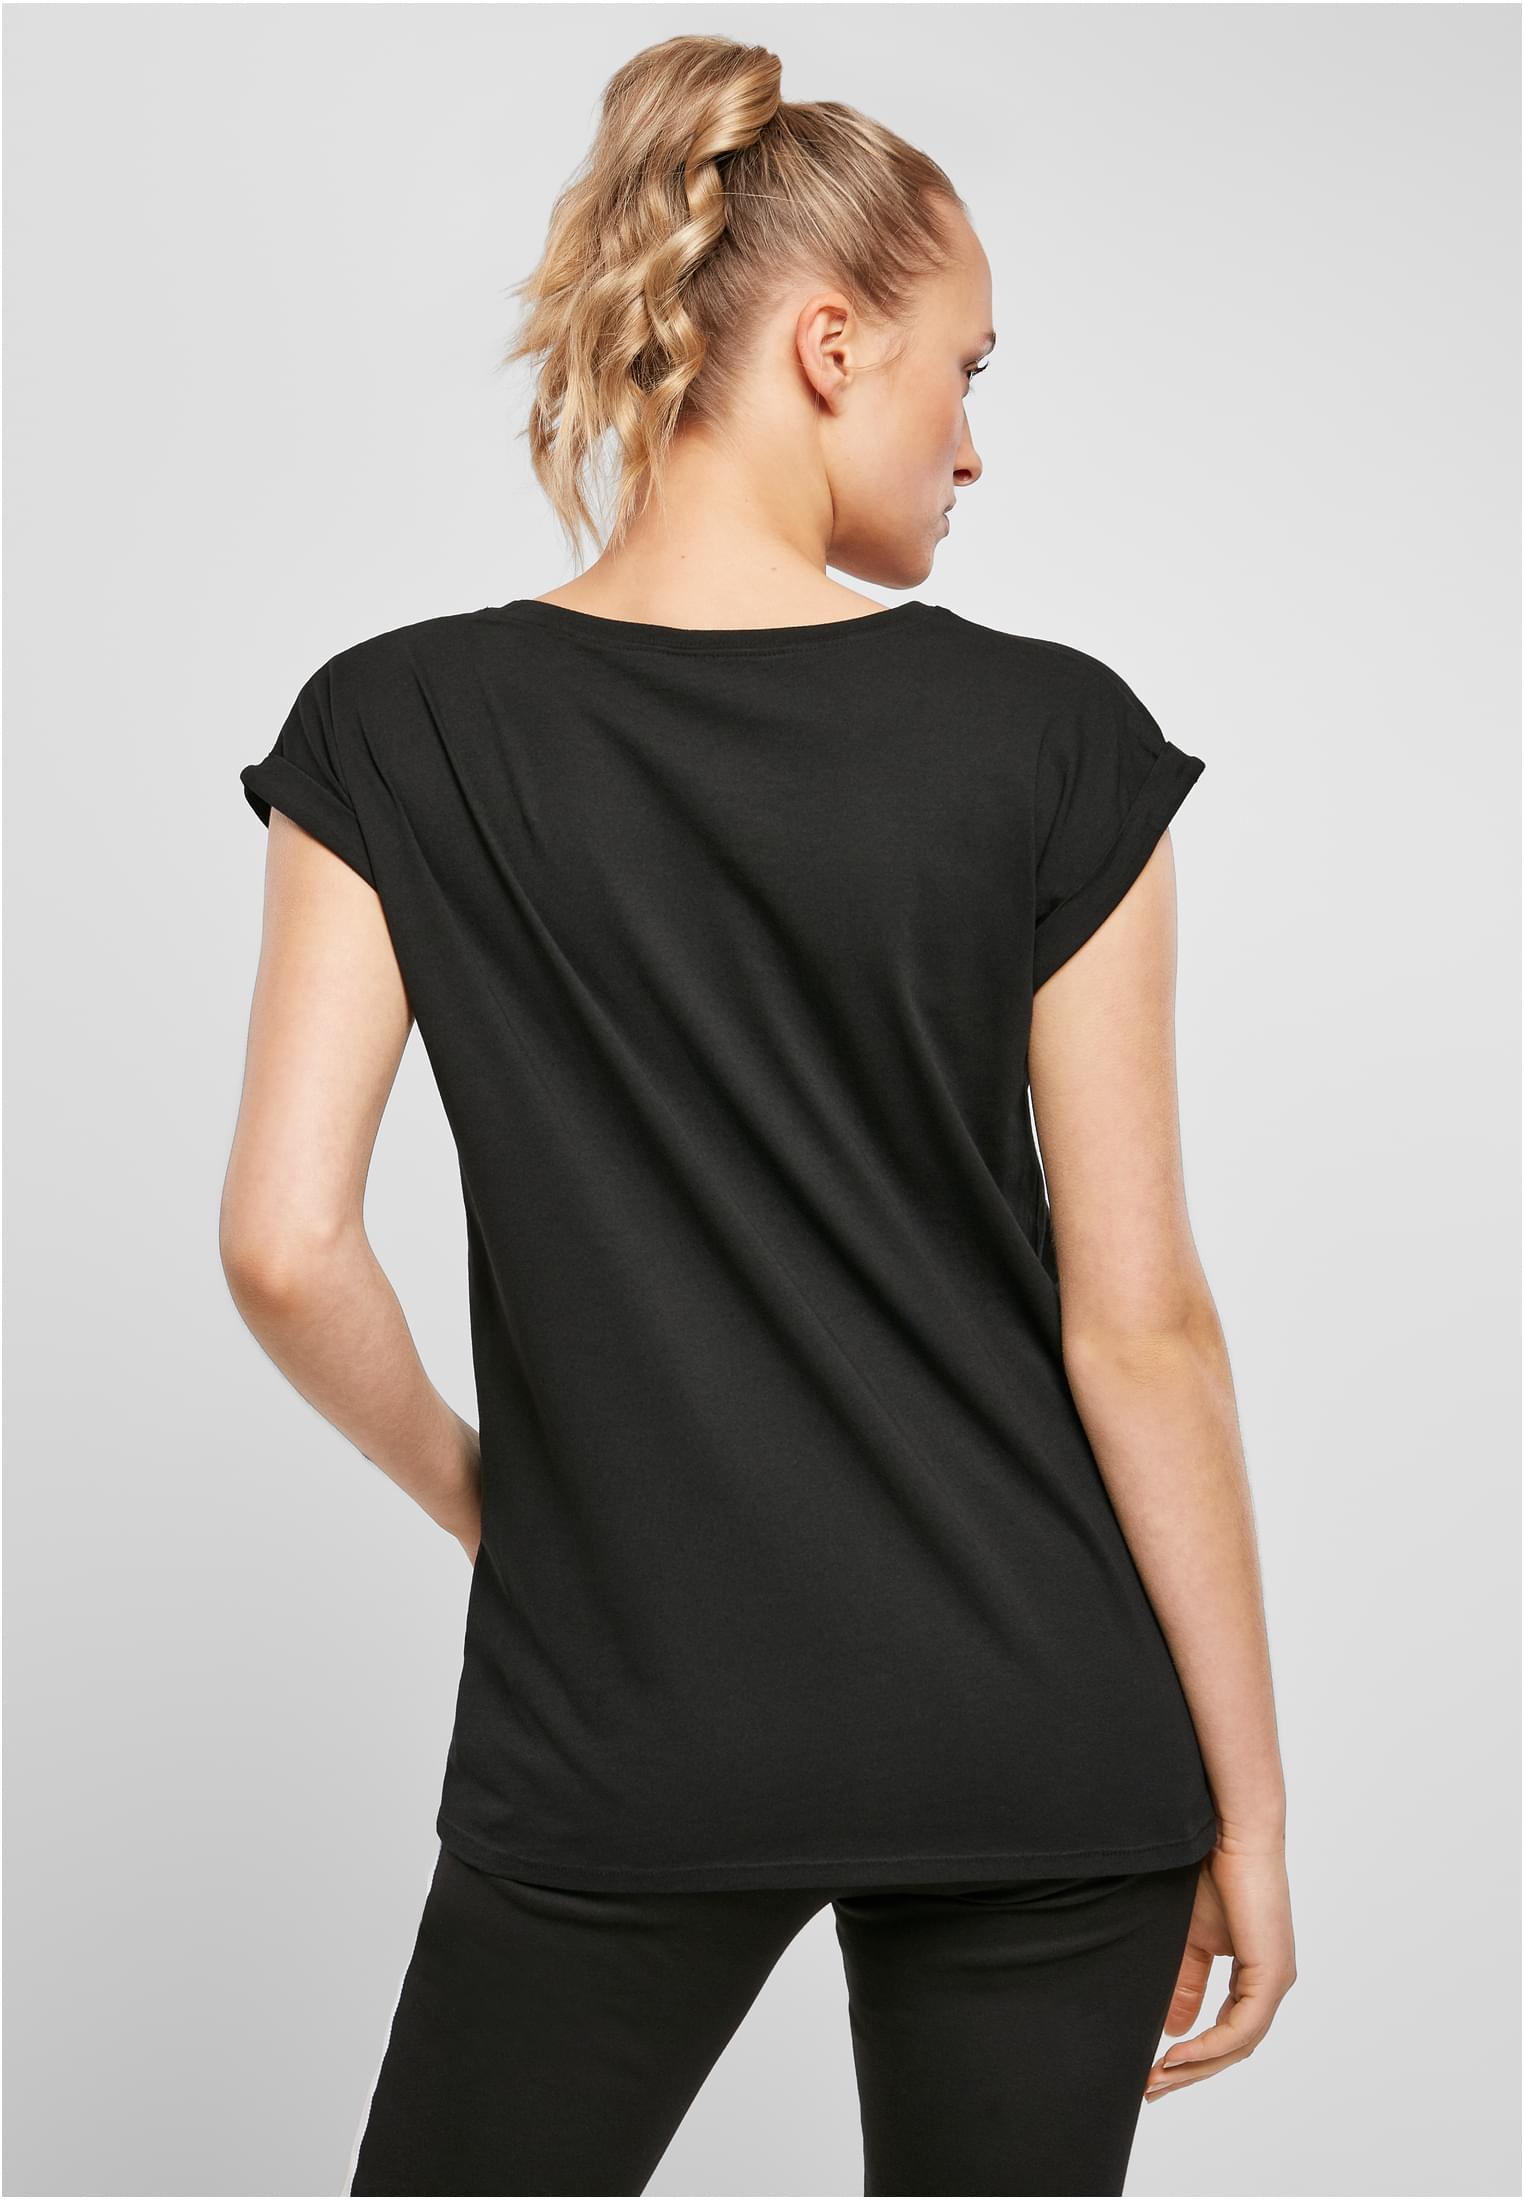 Ladies Organic Extended Shoulder Tee-BY138 | T-Shirts